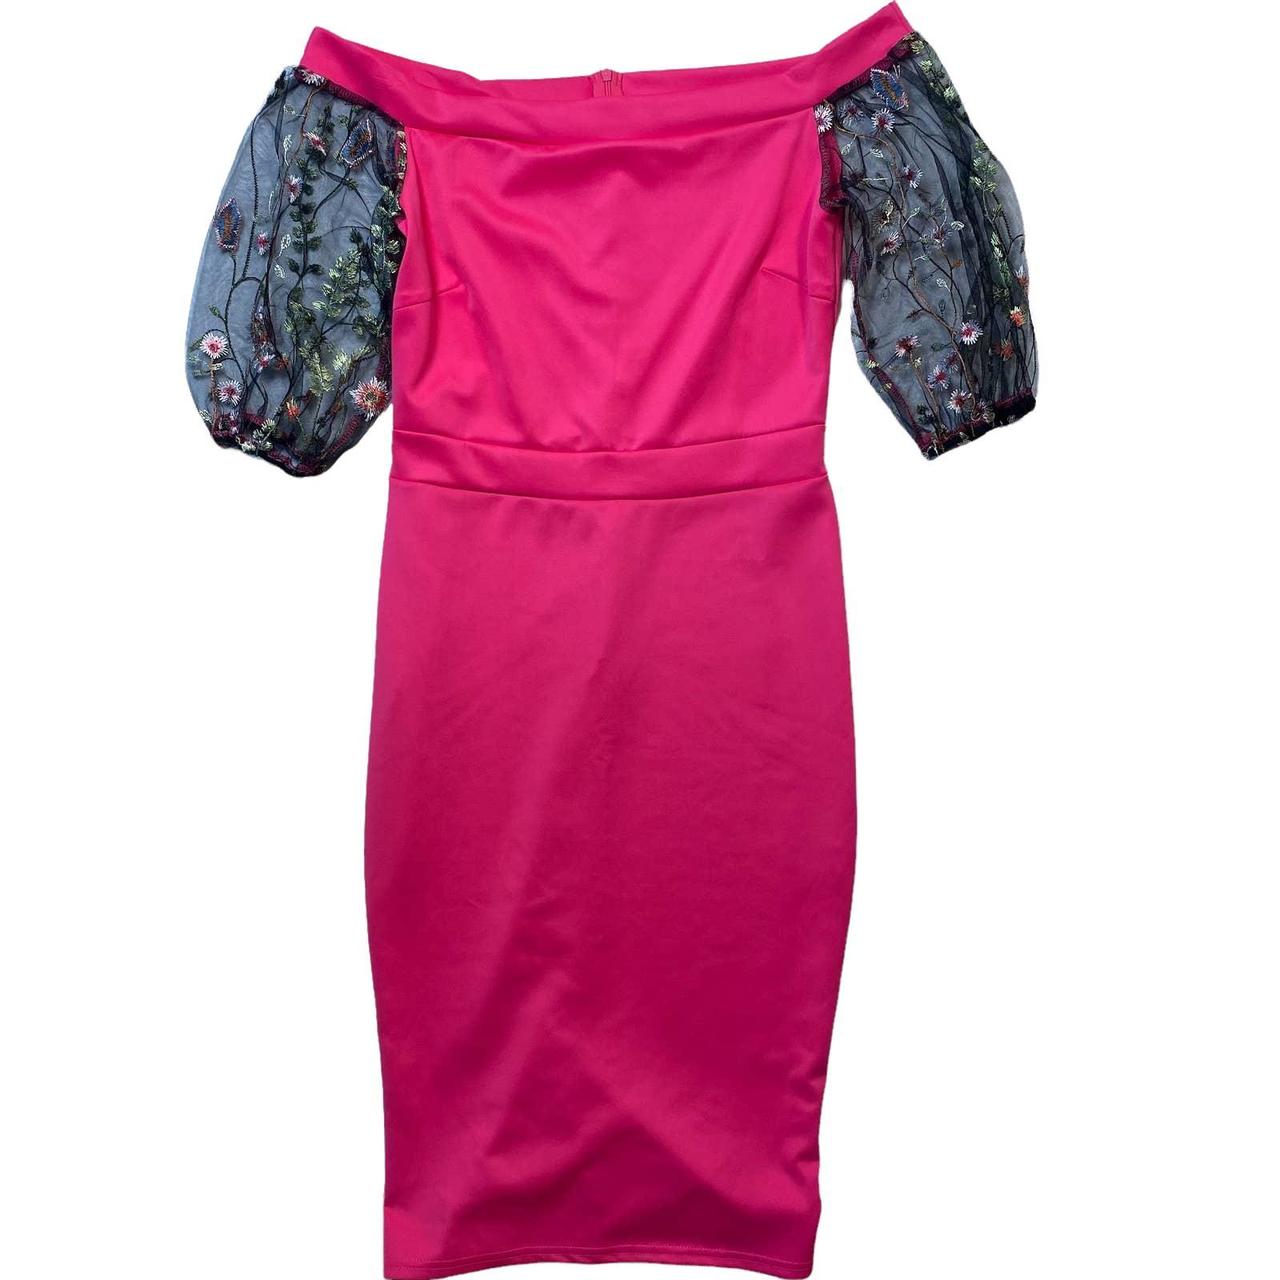 Product Image 1 - Pink Scuba Style Dress with